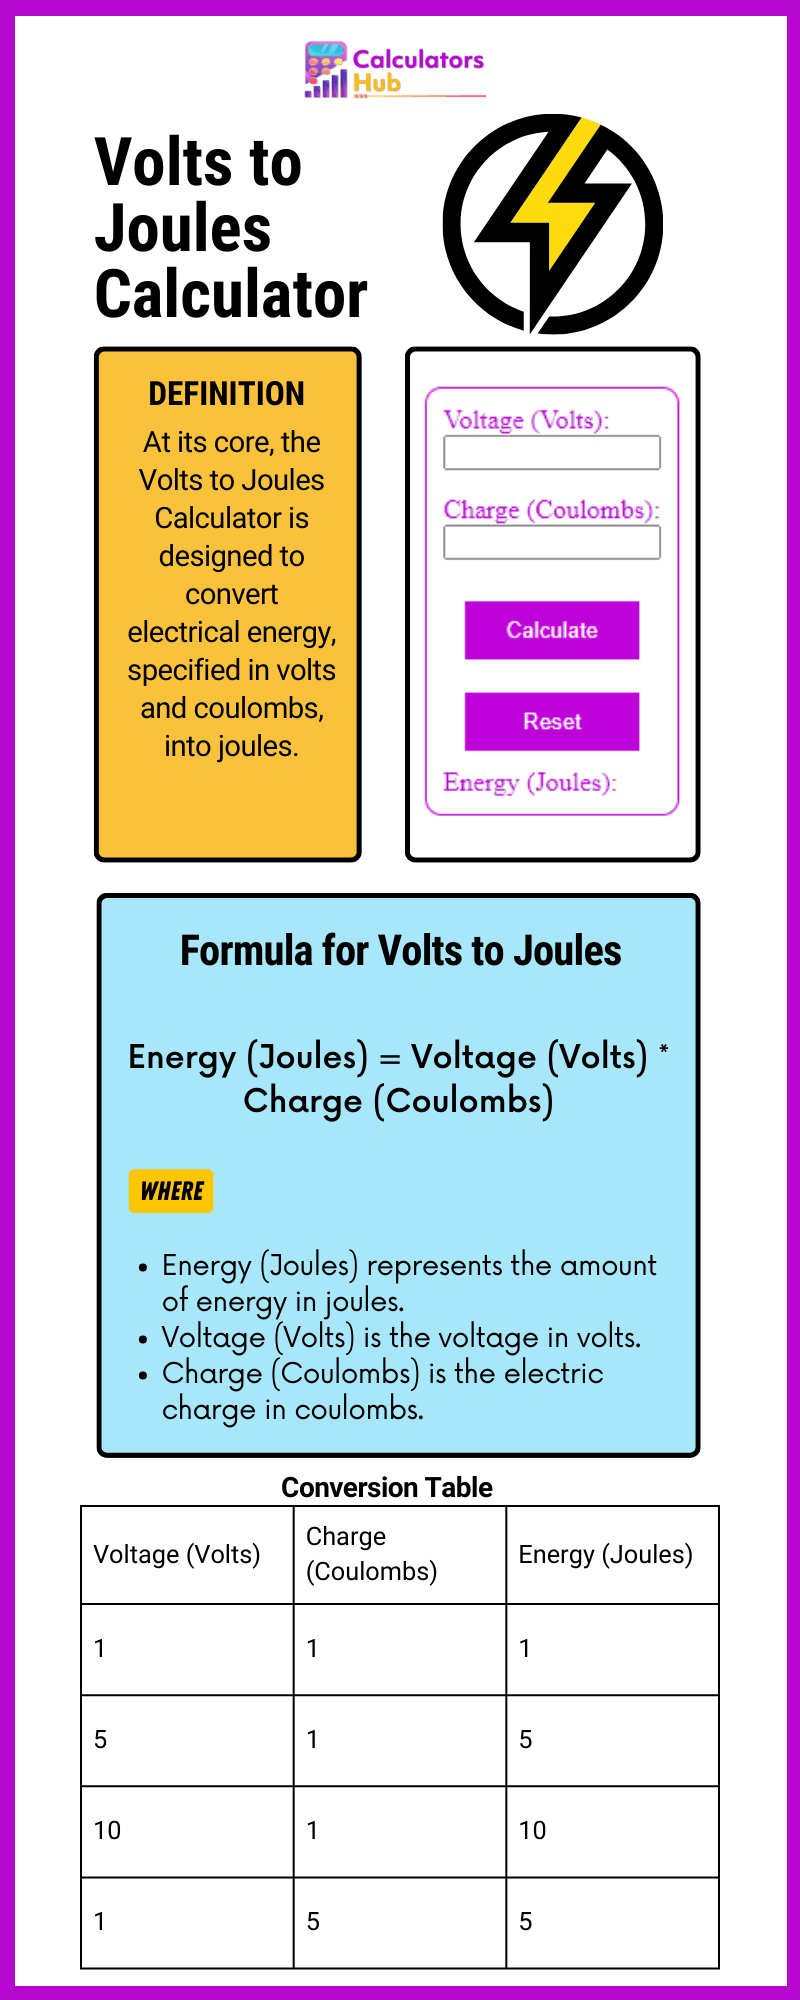 Volts to Joules Calculator